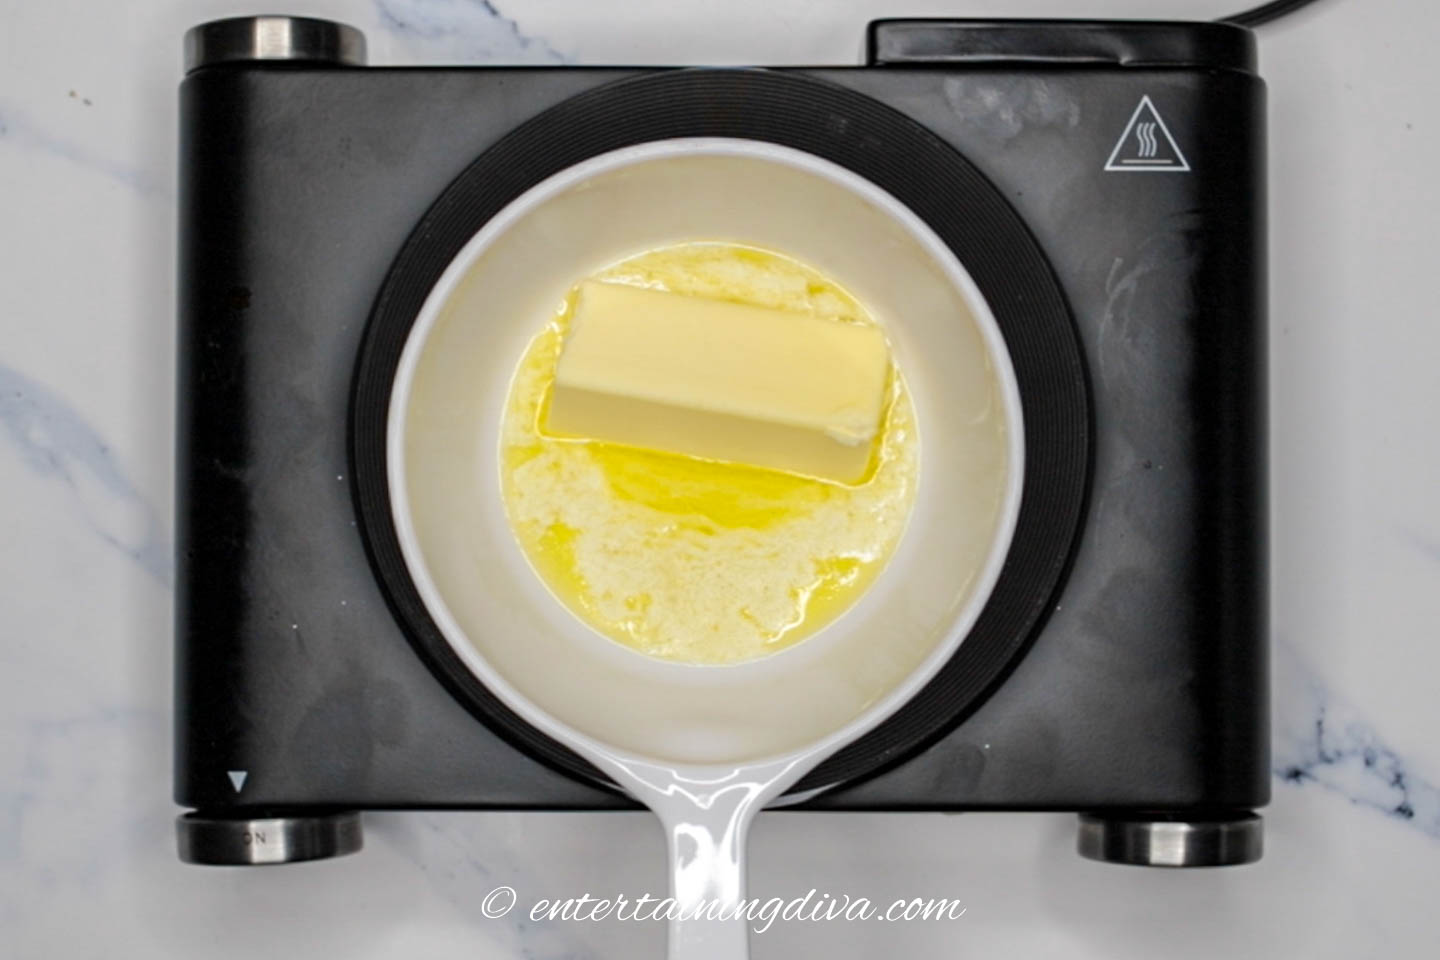 Butter melting on the stove